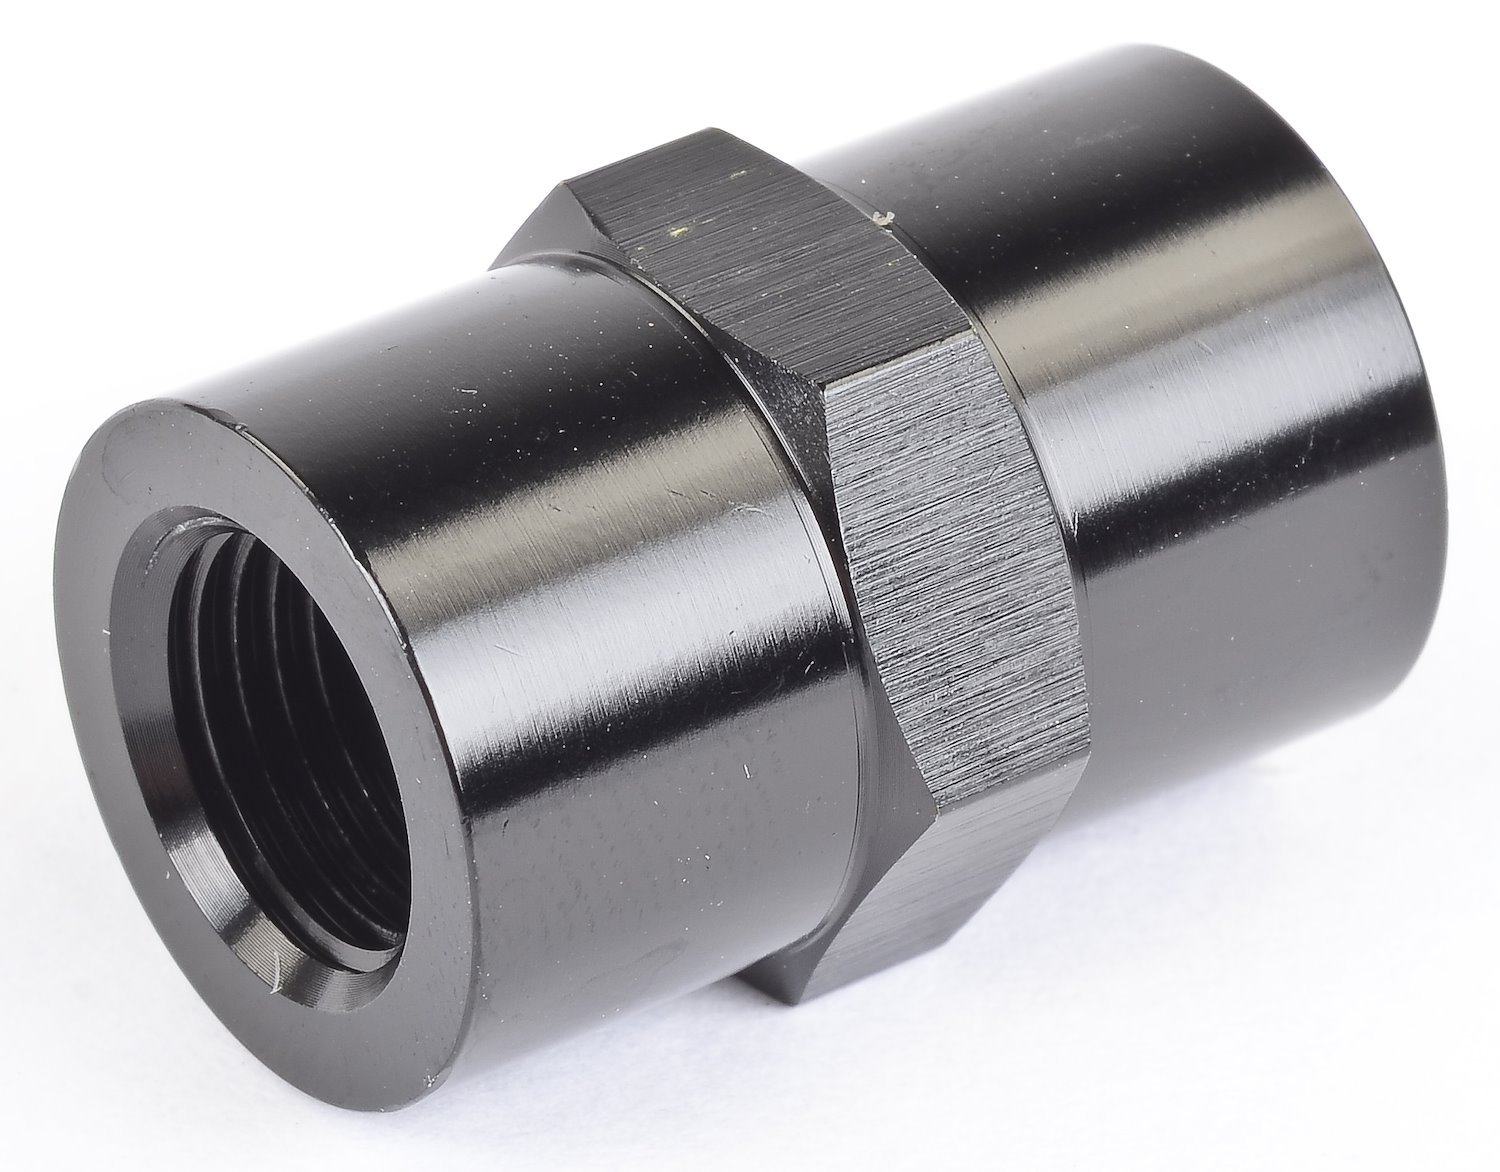 NPT to NPT Straight Union Fitting [1/8 in. NPT Female to 1/8 in. NPT Female, Black]